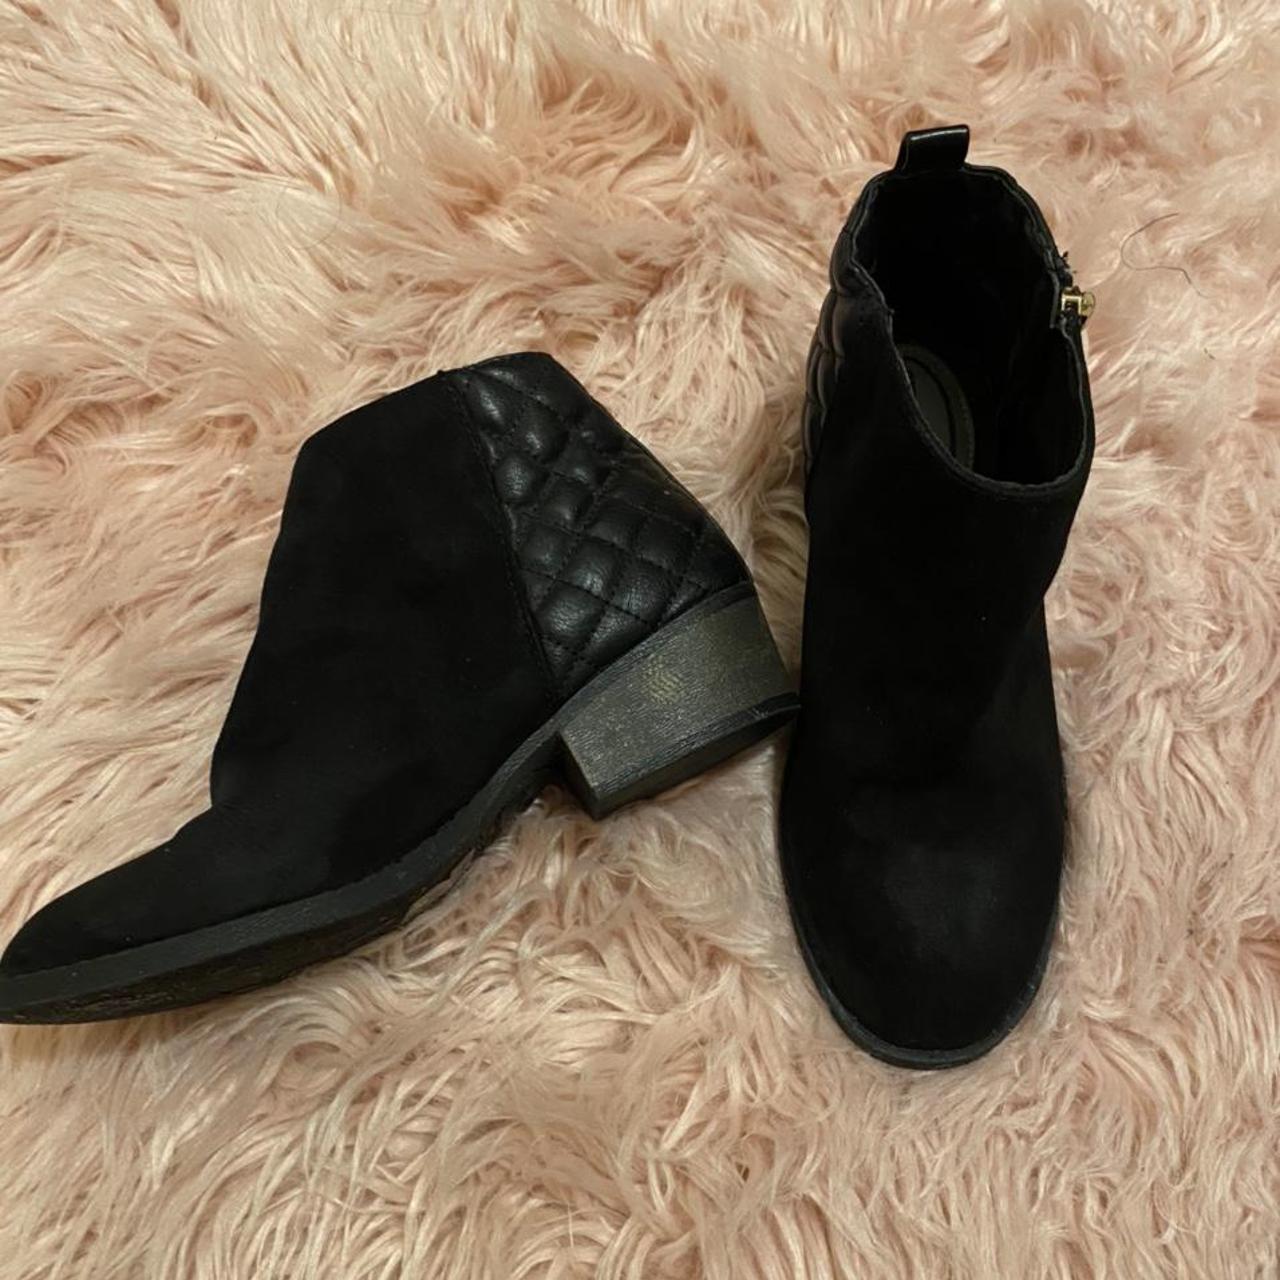 Steve Madden low heel ankle boots. These have been - Depop